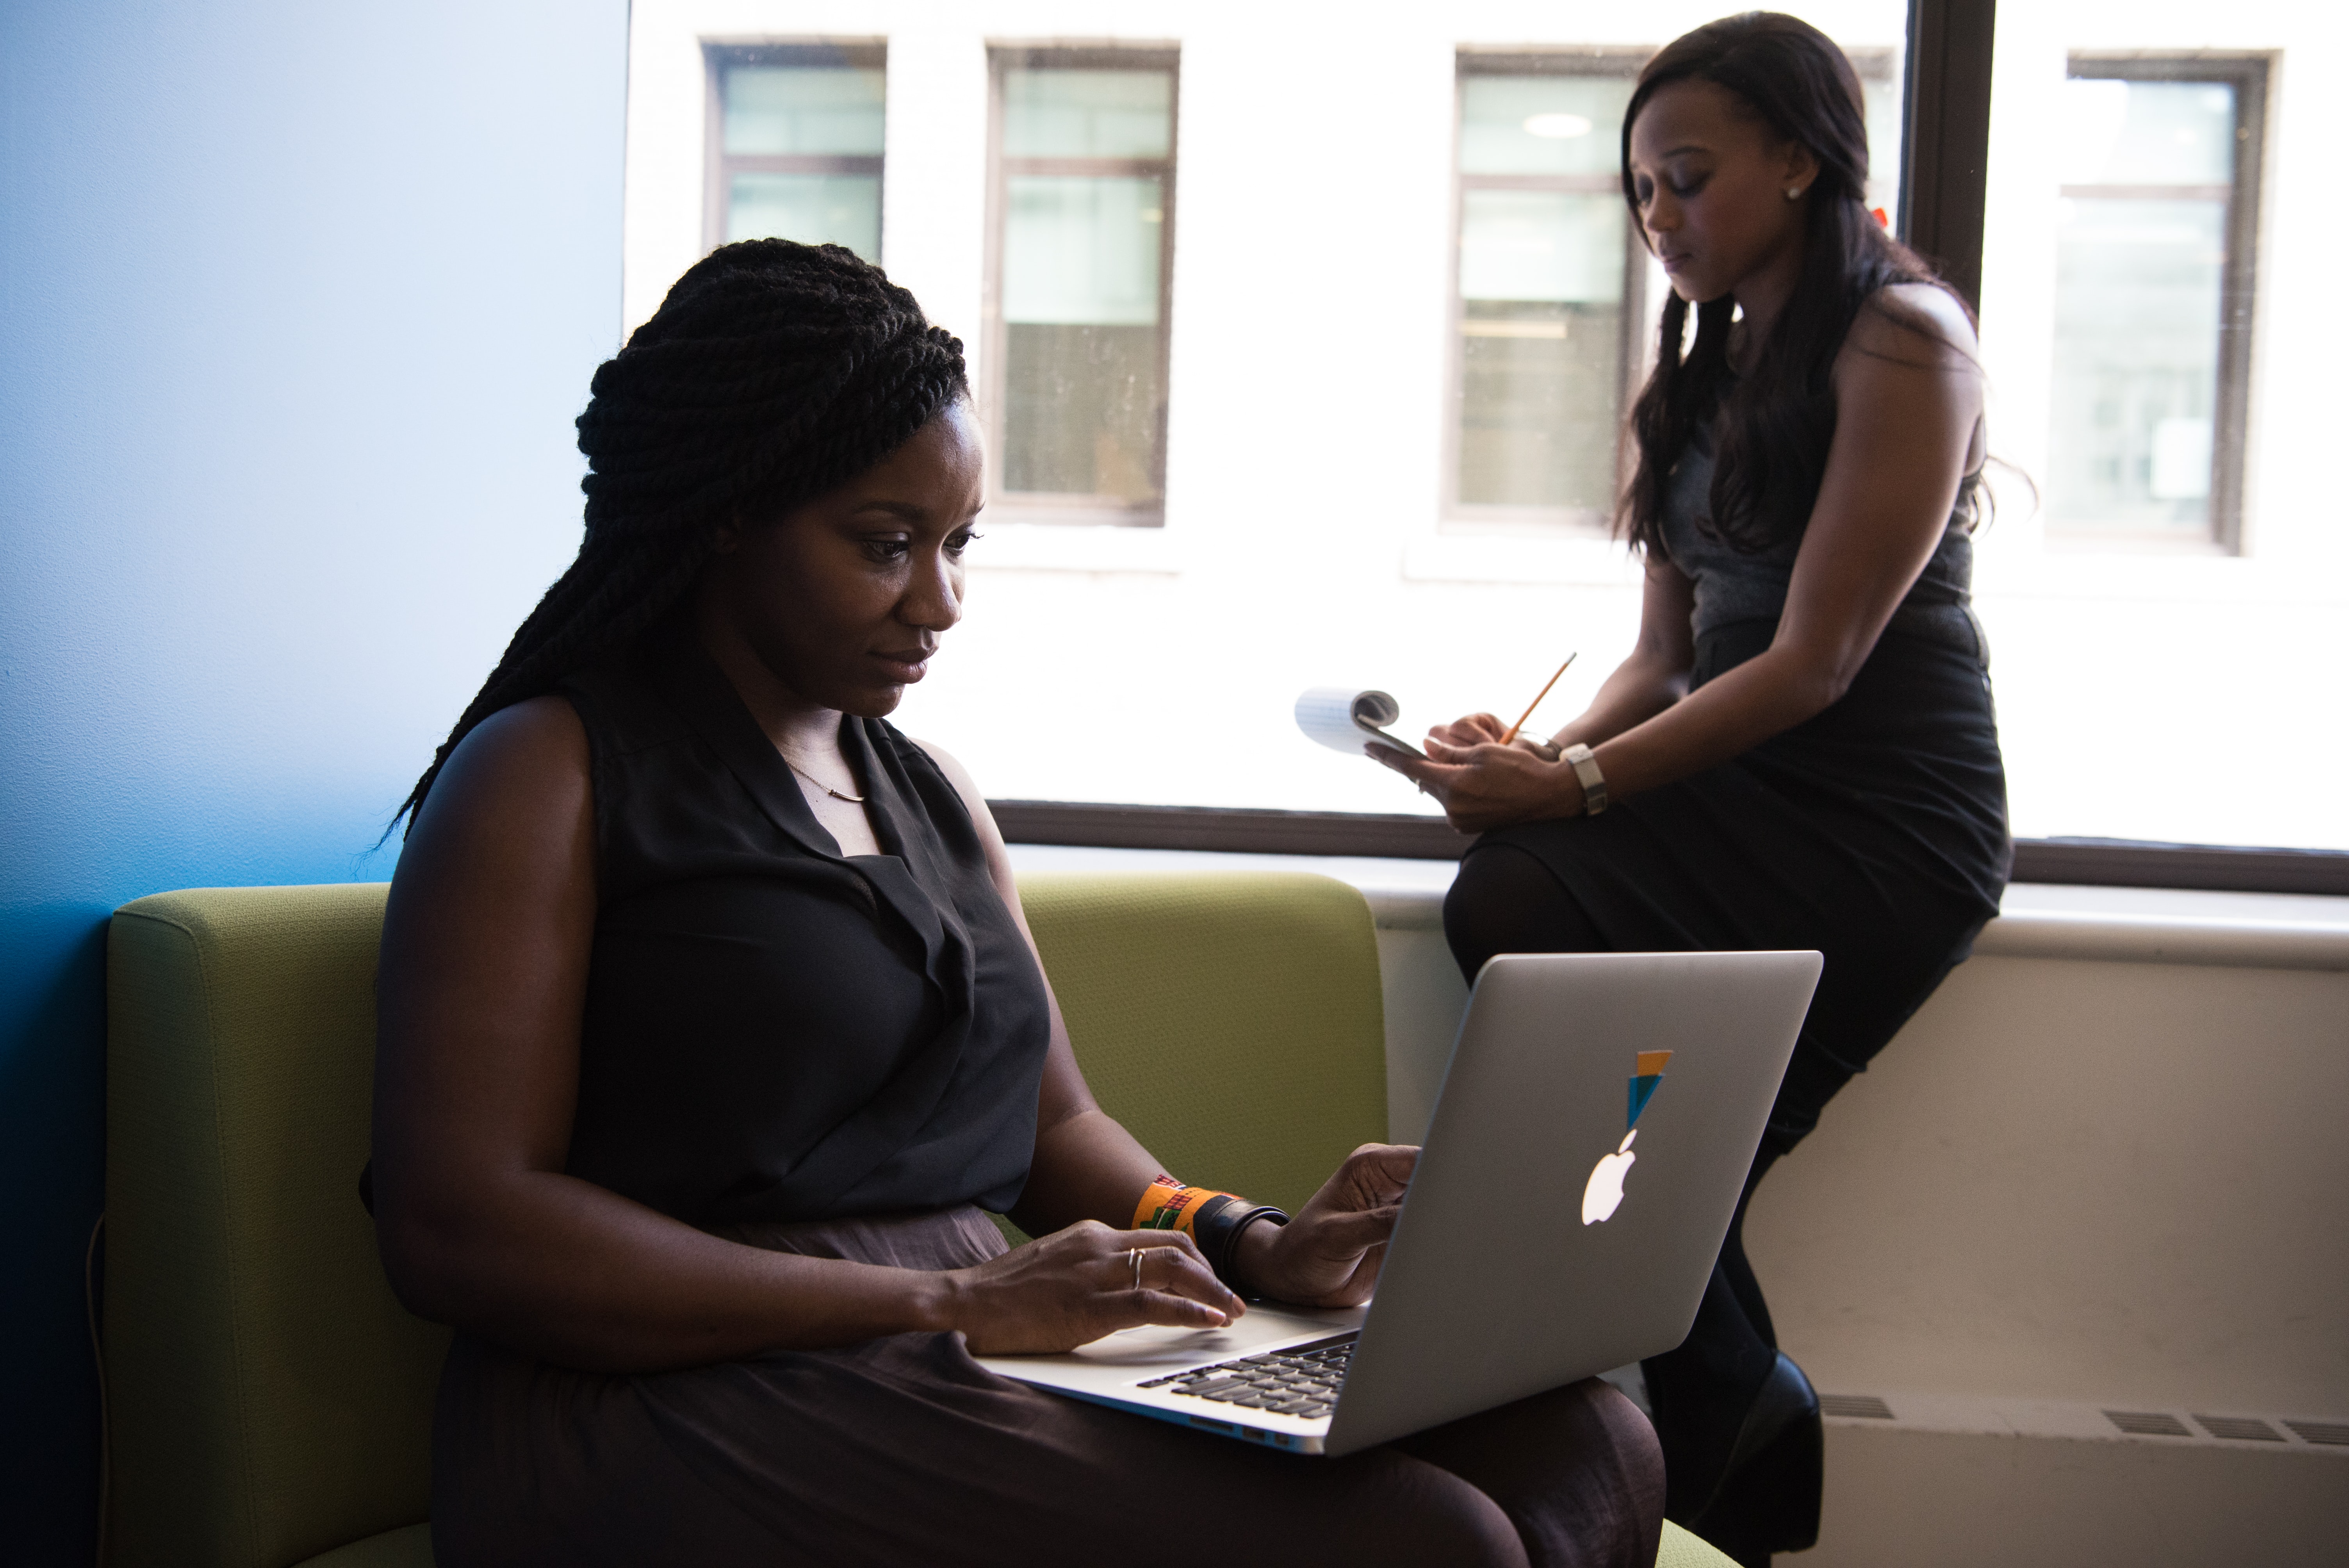 Two women working together in an office environment